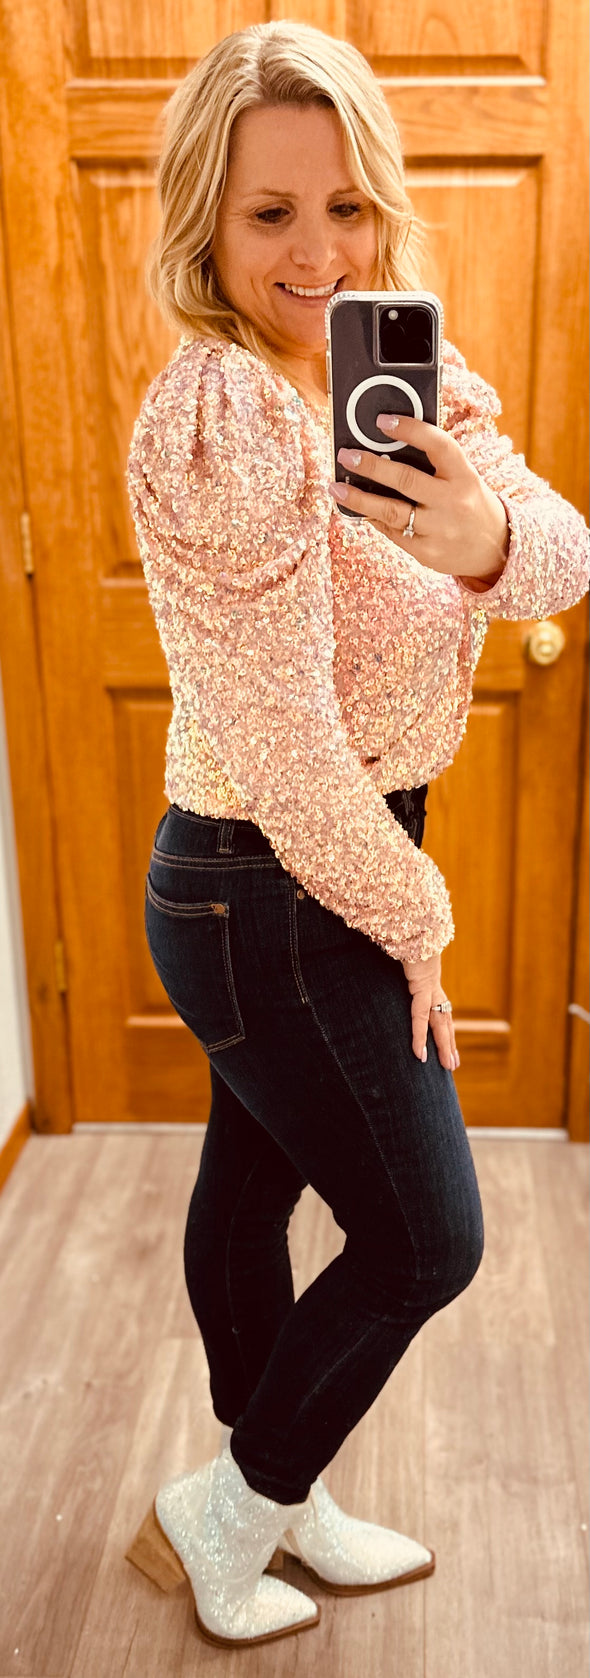 Showstopper Sequin Top